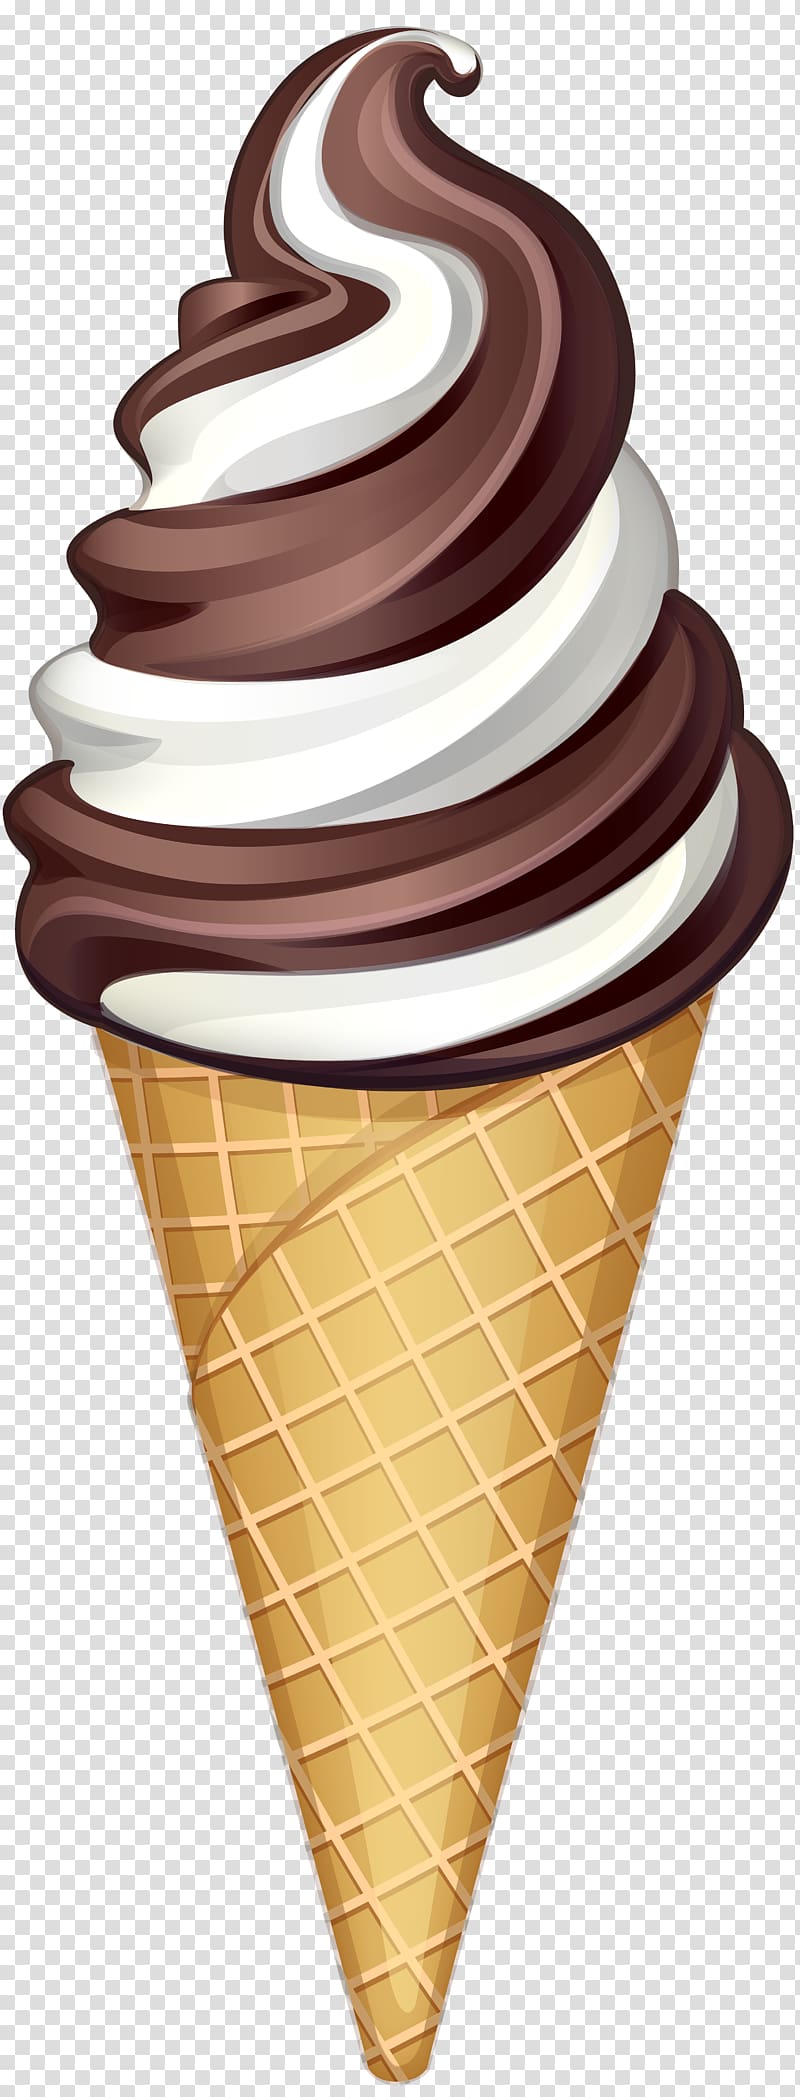 soft serve ice cream , file formats Lossless compression, Ice Cream transparent background PNG clipart